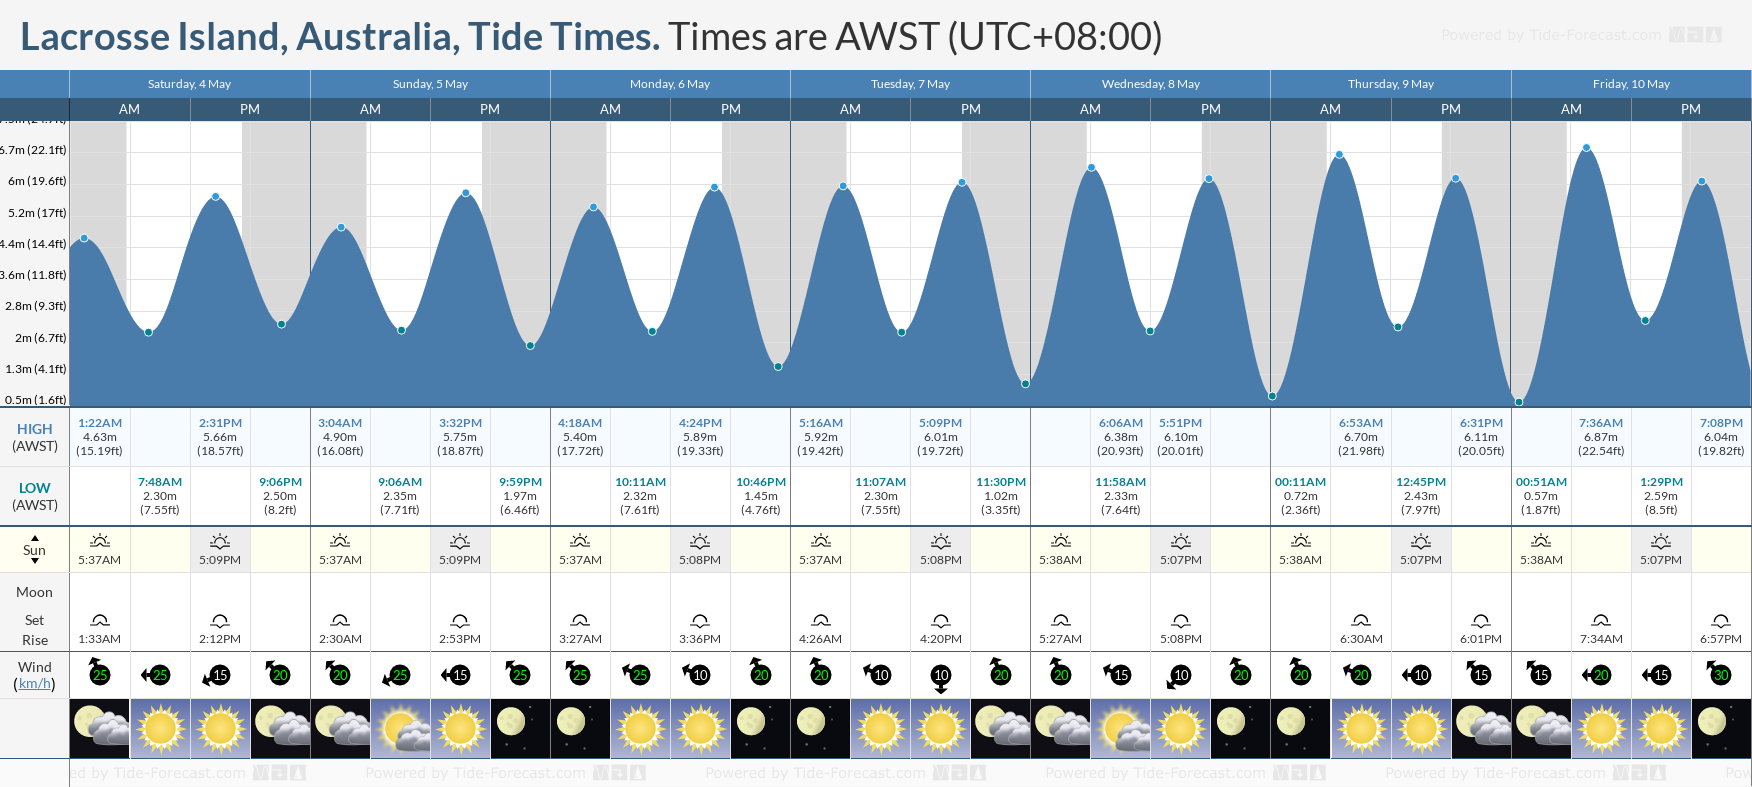 Lacrosse Island, Australia Tide Chart including high and low tide tide times for the next 7 days